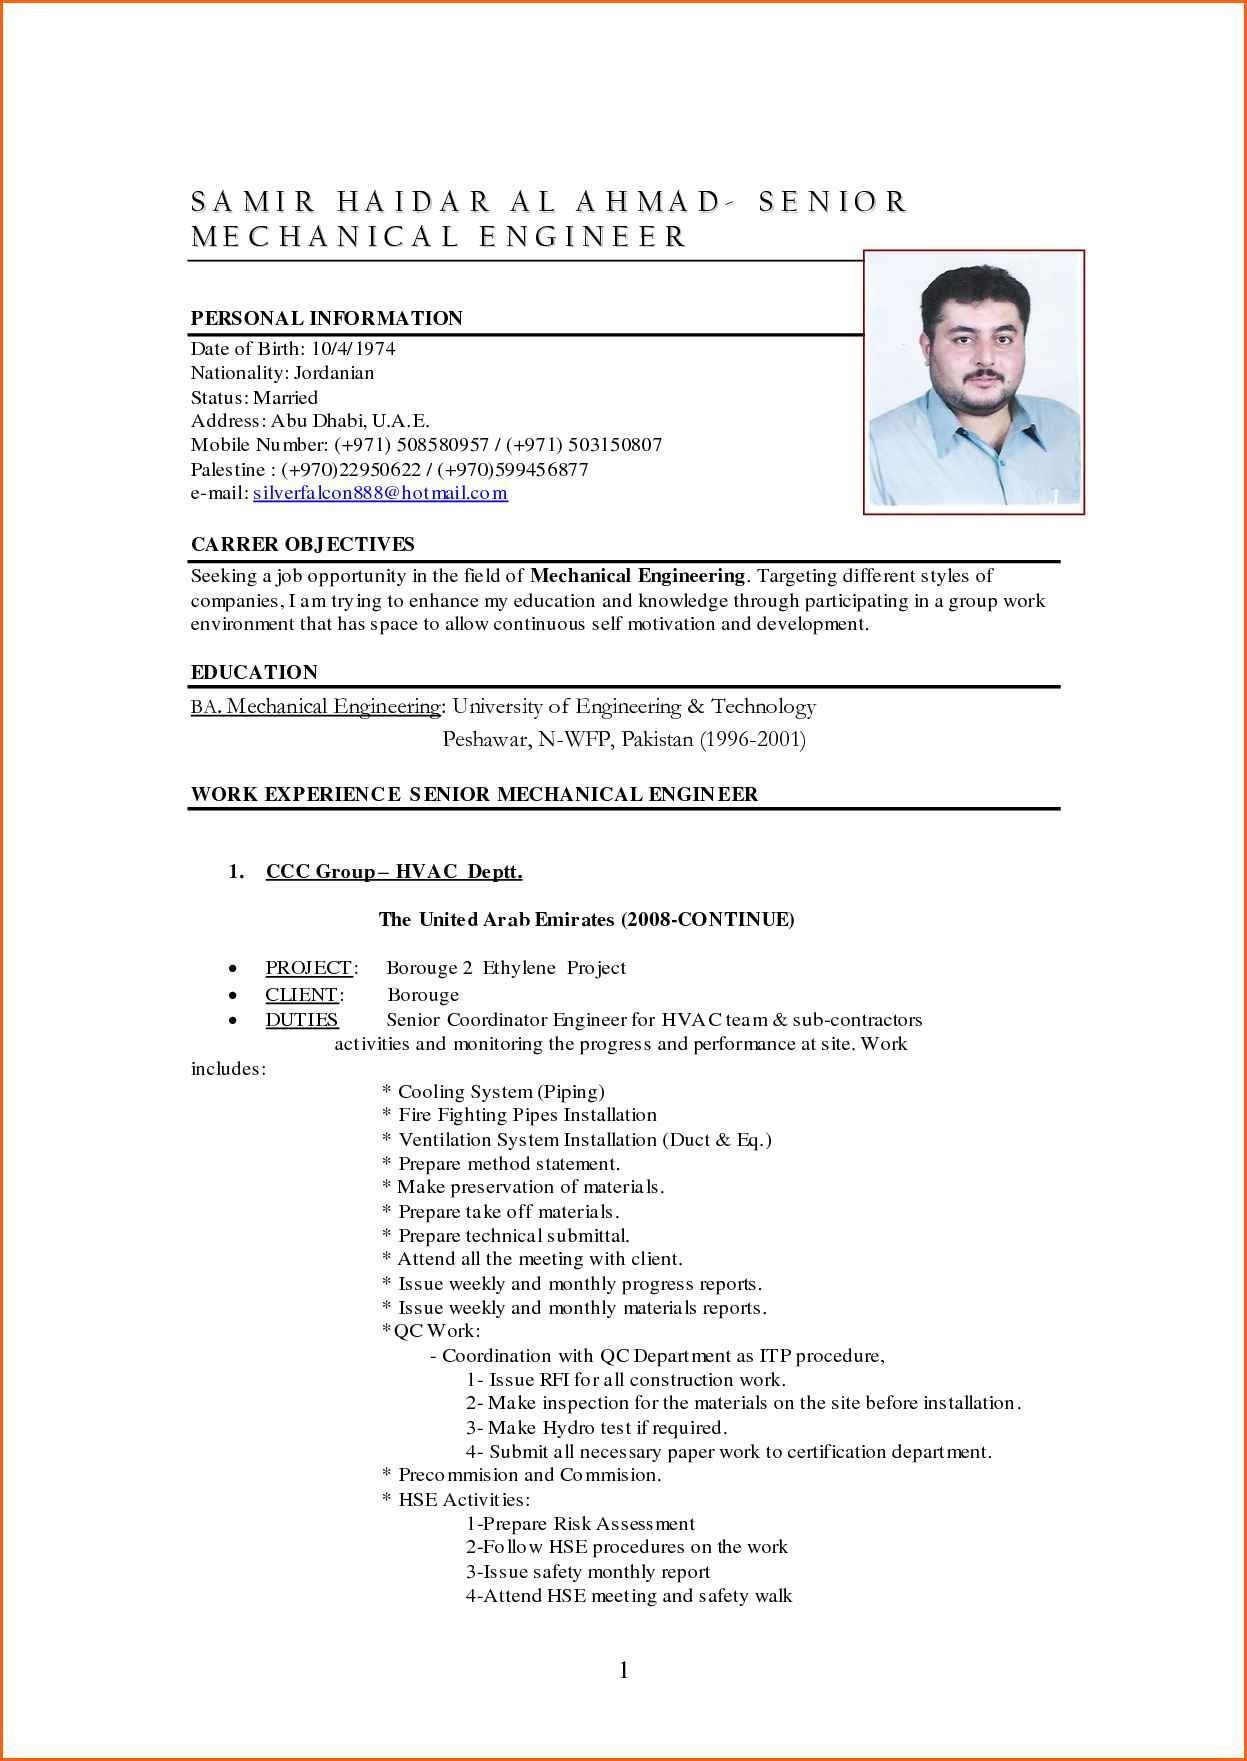 1 Year Experience Resume Sample for Mechanical Engineer Mechanical Engineer Resume Sample Modern Resume format for Diploma …